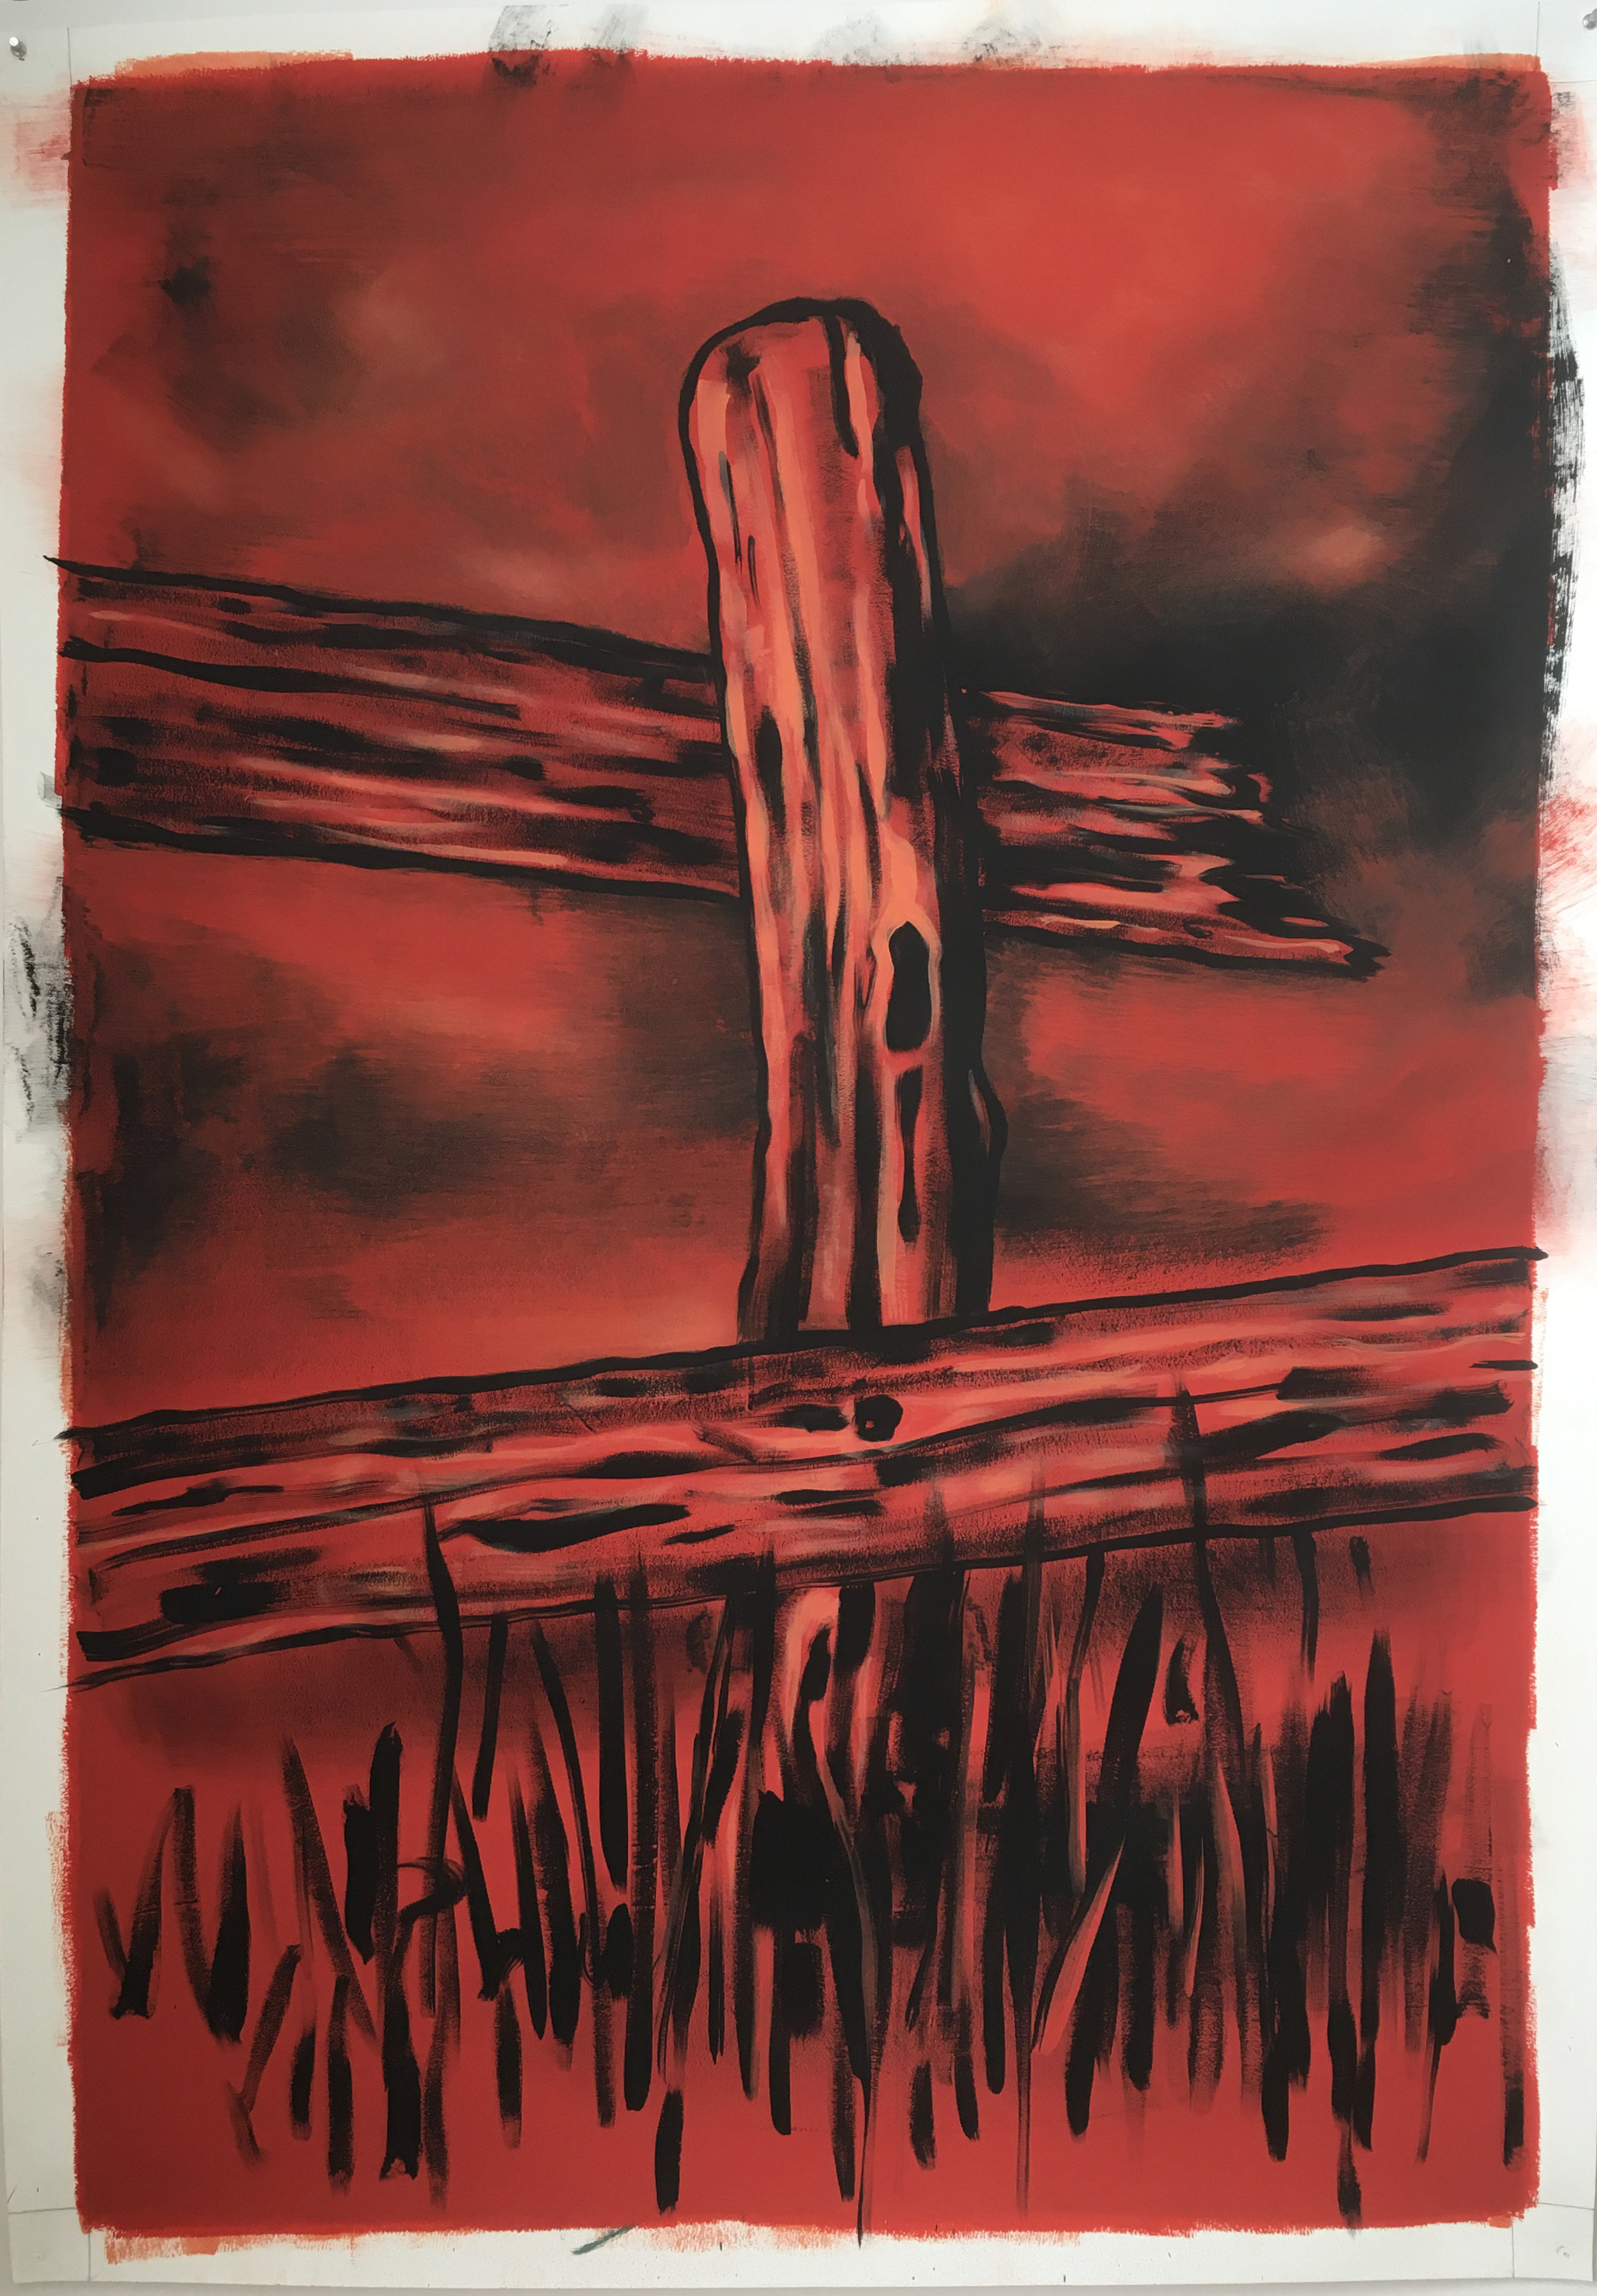    Steeple,   2017 Tempera and gesso on paper, 60" x 40" 